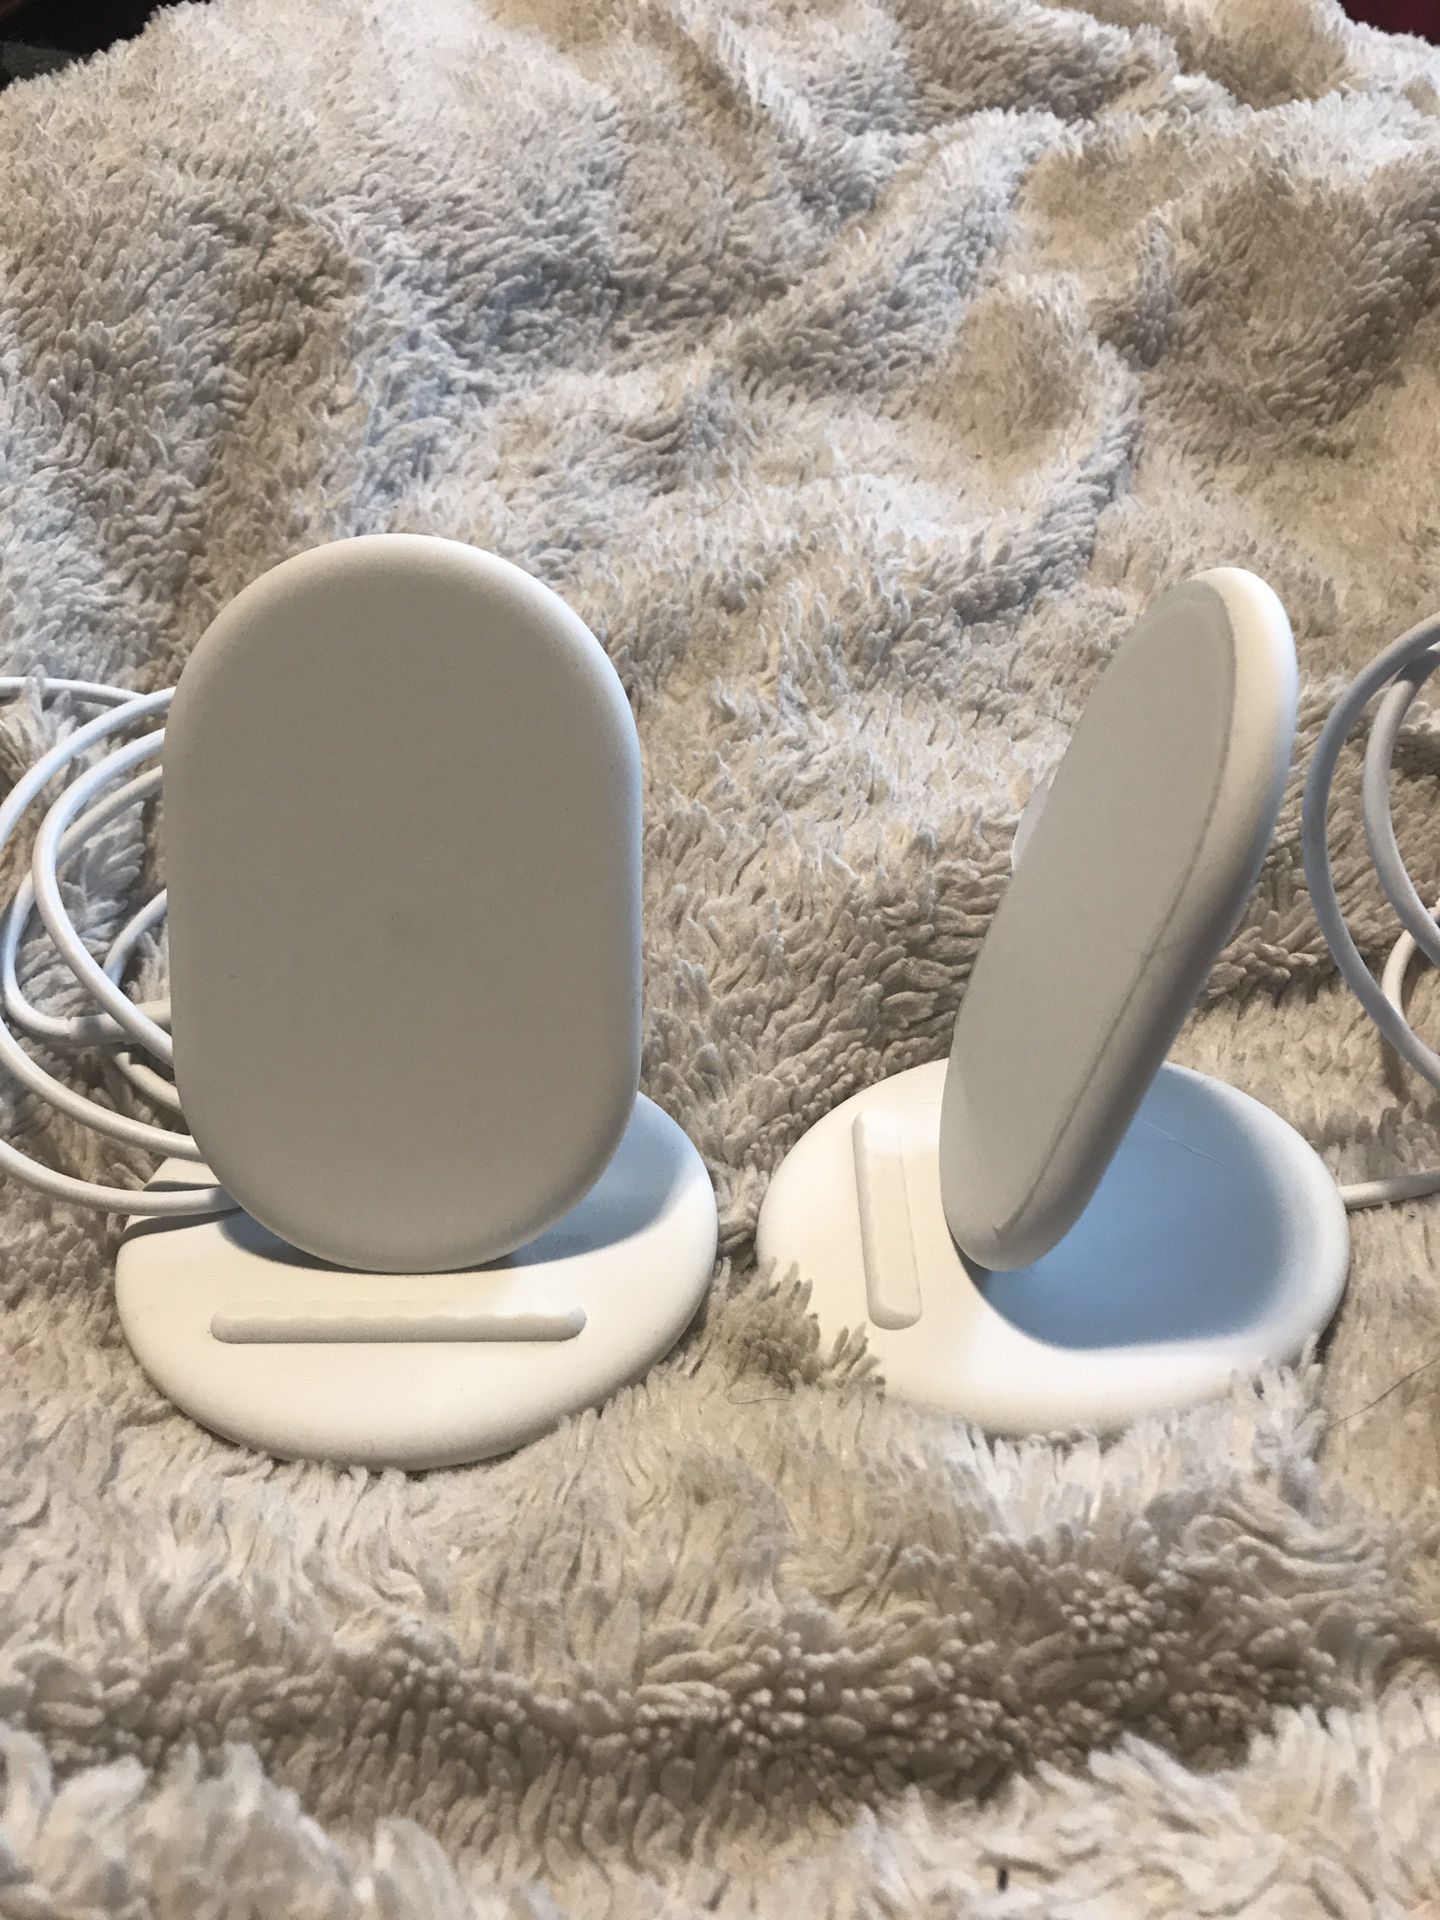 Google pixel stand $90 for both